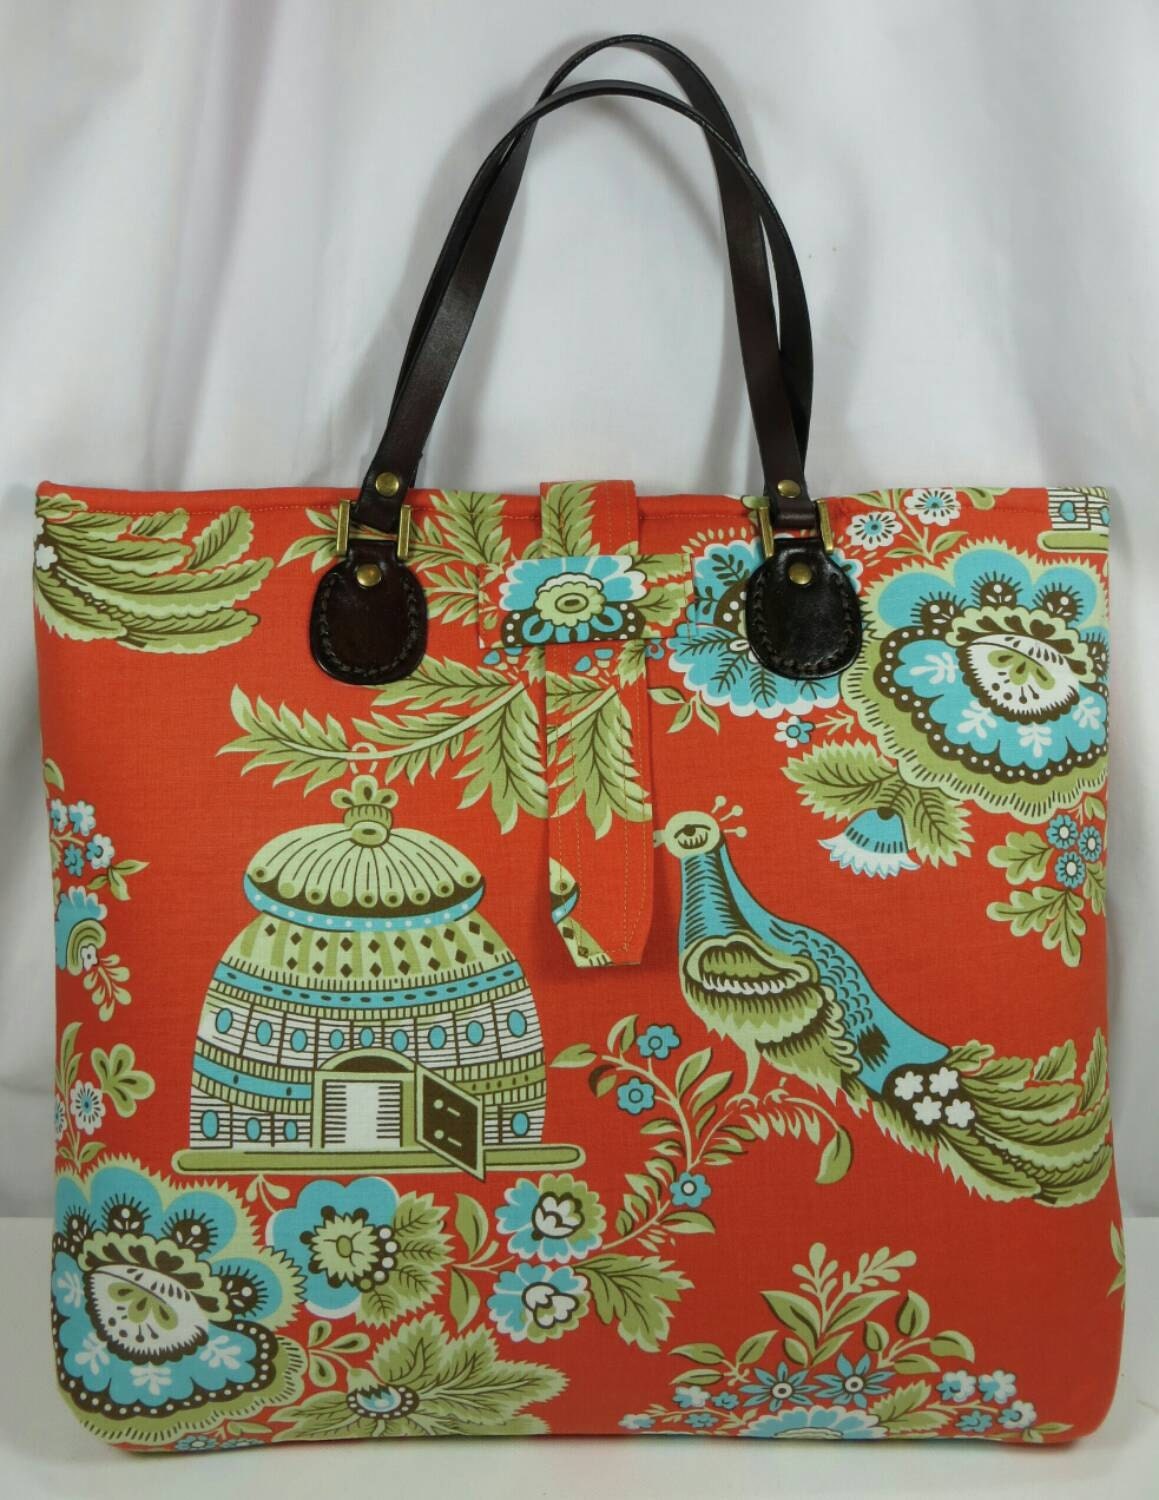 Handbag with peacock design and leather handles by MarcelasPurse